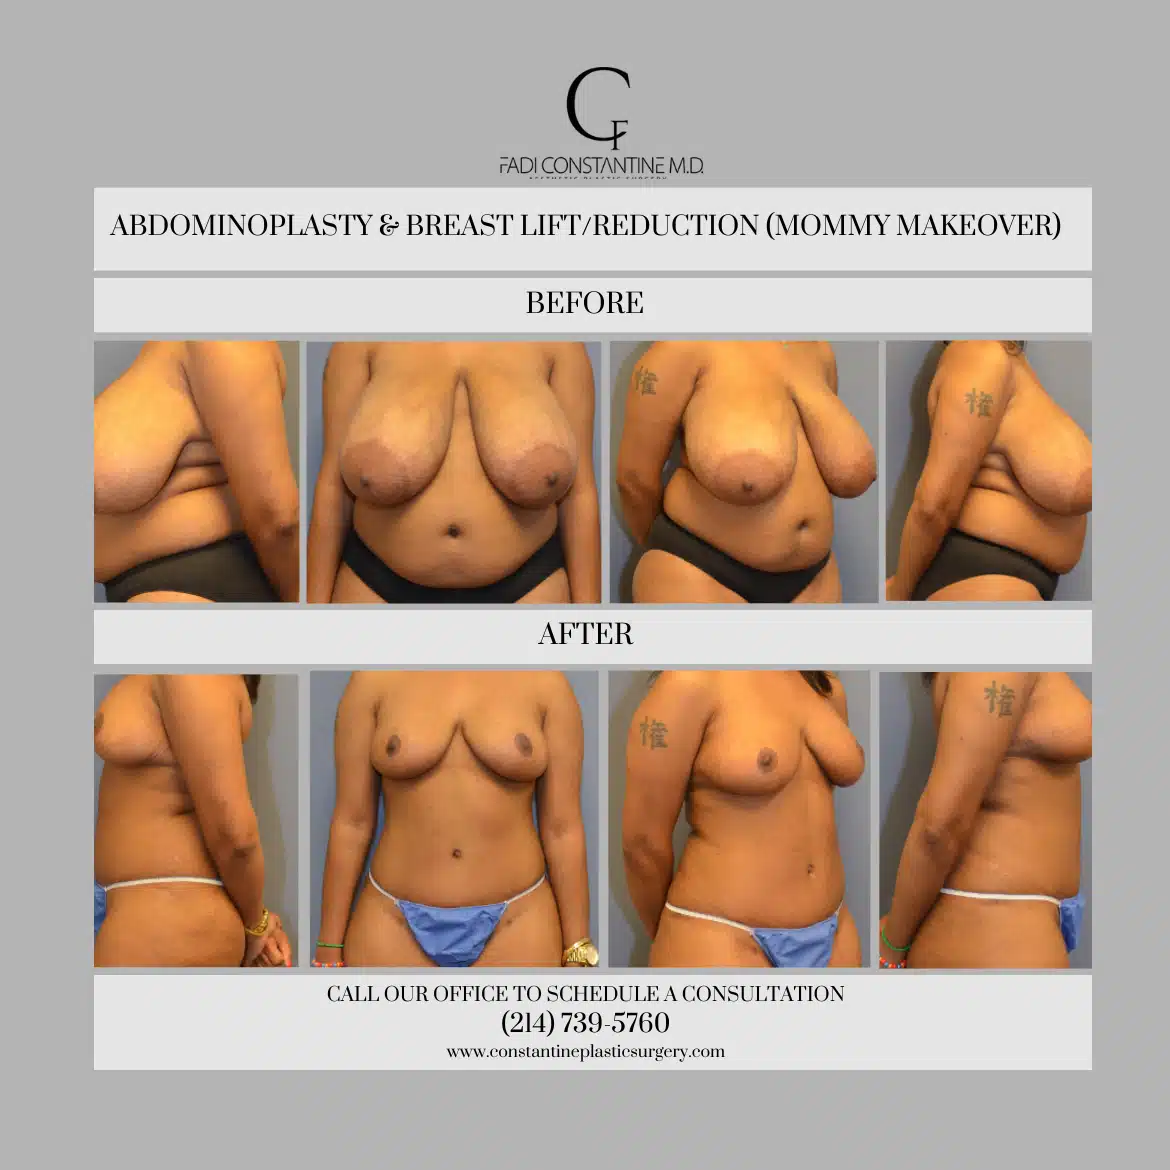 Does a Breast Lift Reduce Cup Size?